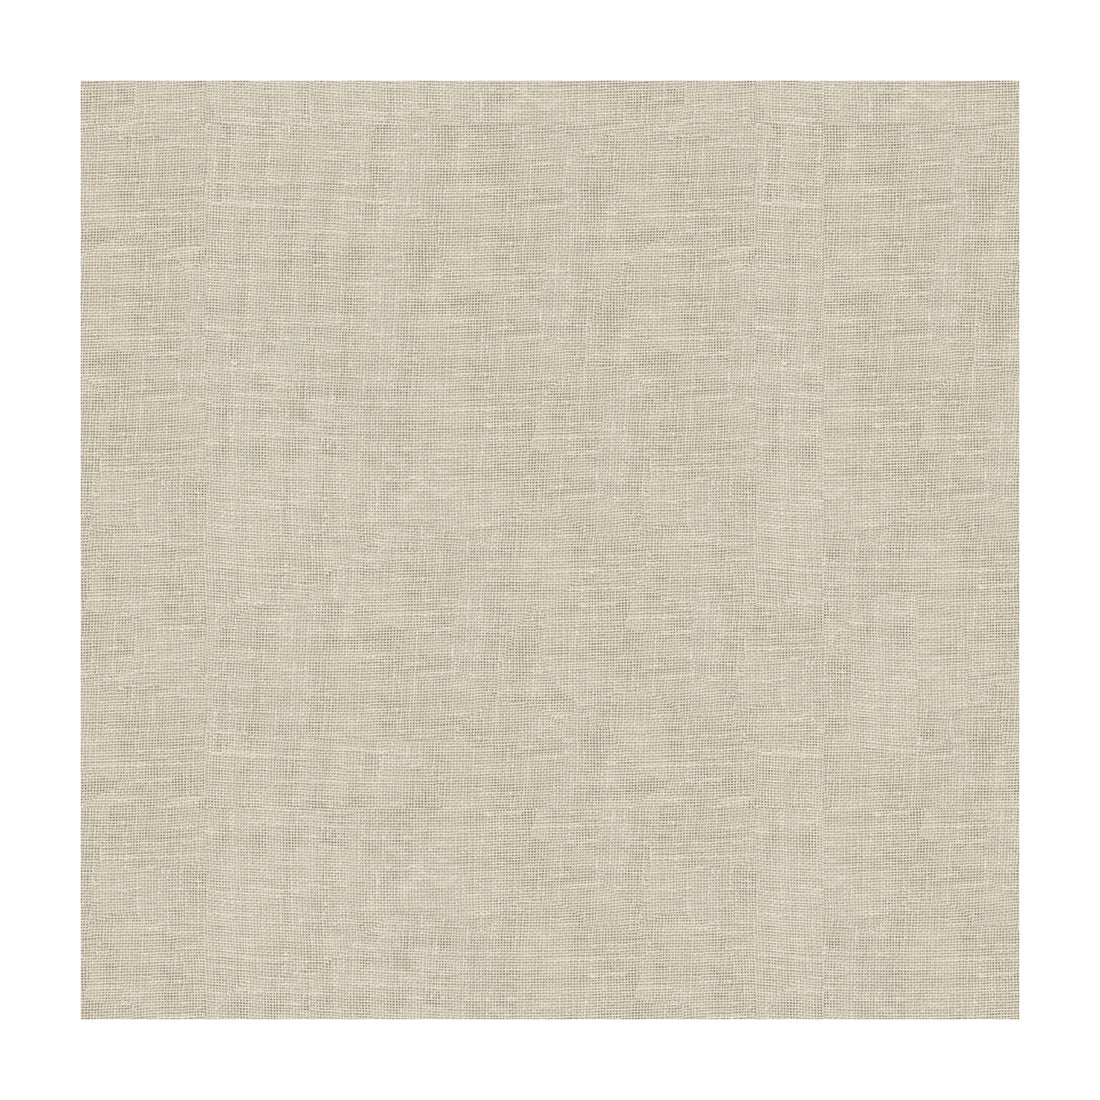 Kravet Contract fabric in 4166-1 color - pattern 4166.1.0 - by Kravet Contract